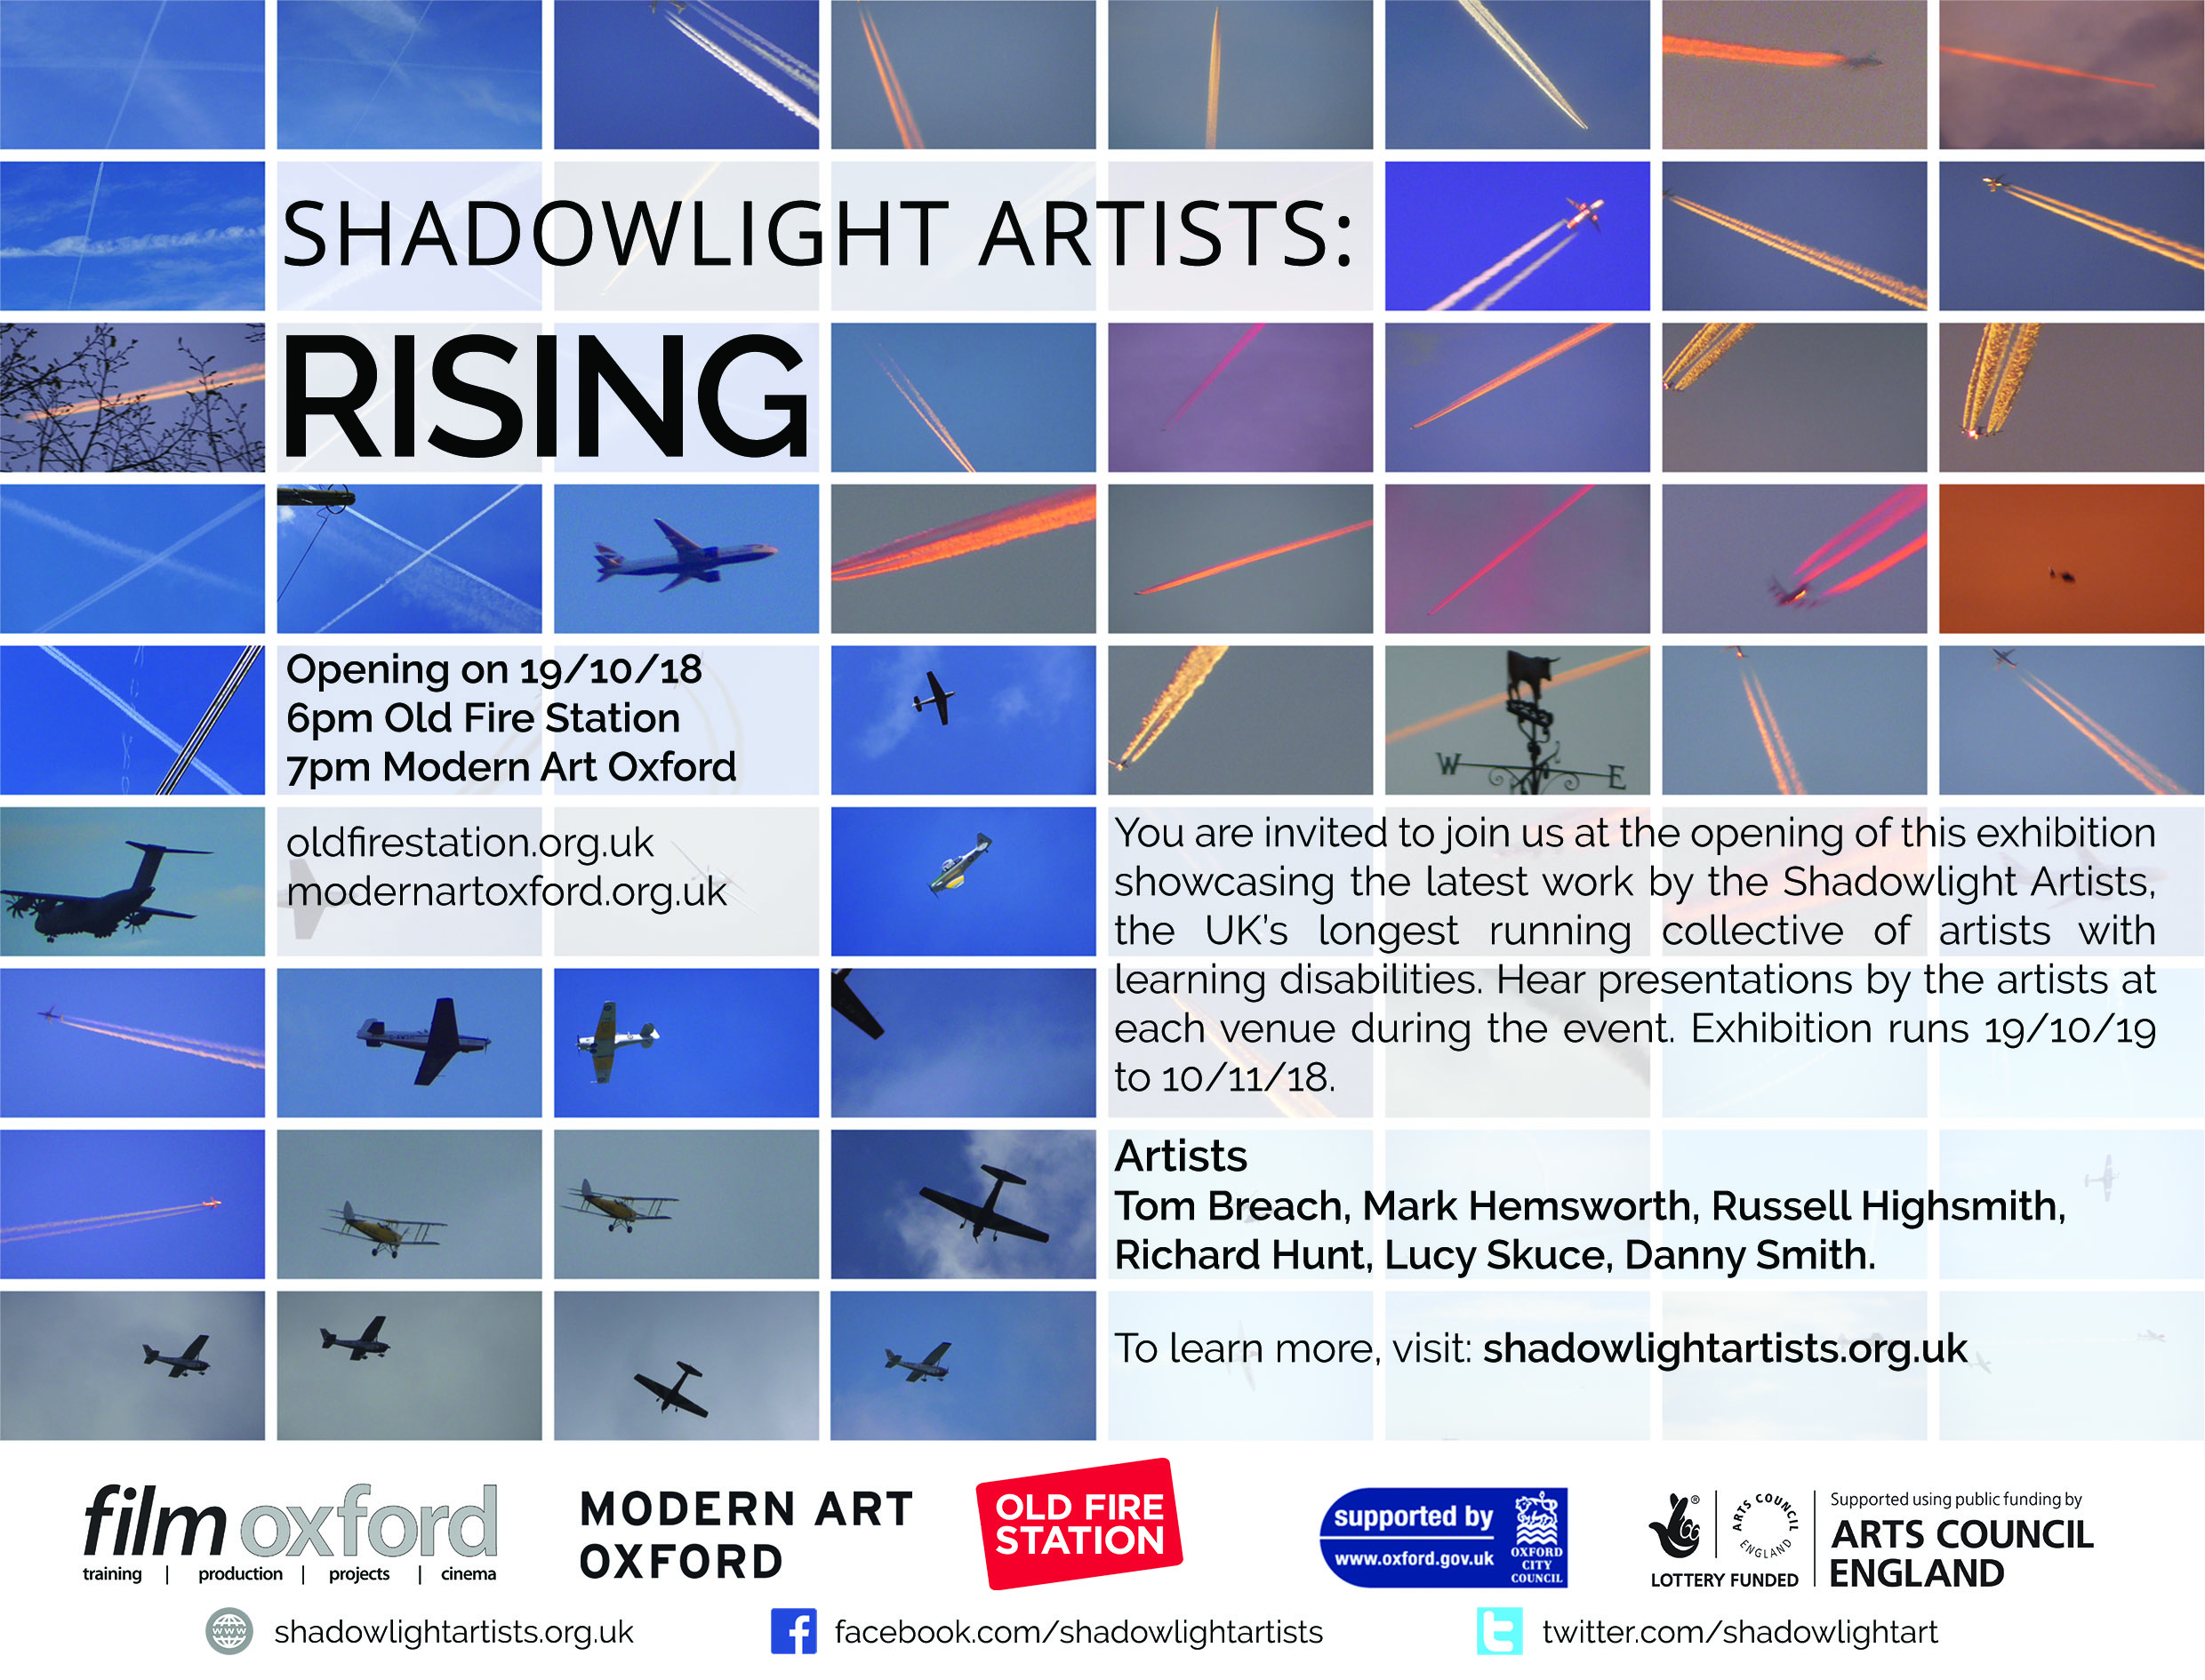 Shadowlight Artists Exhibition - Rising - opens 19th October 2018 at Old Fire Station and Modern Art Oxford and runs to 10th November 2018